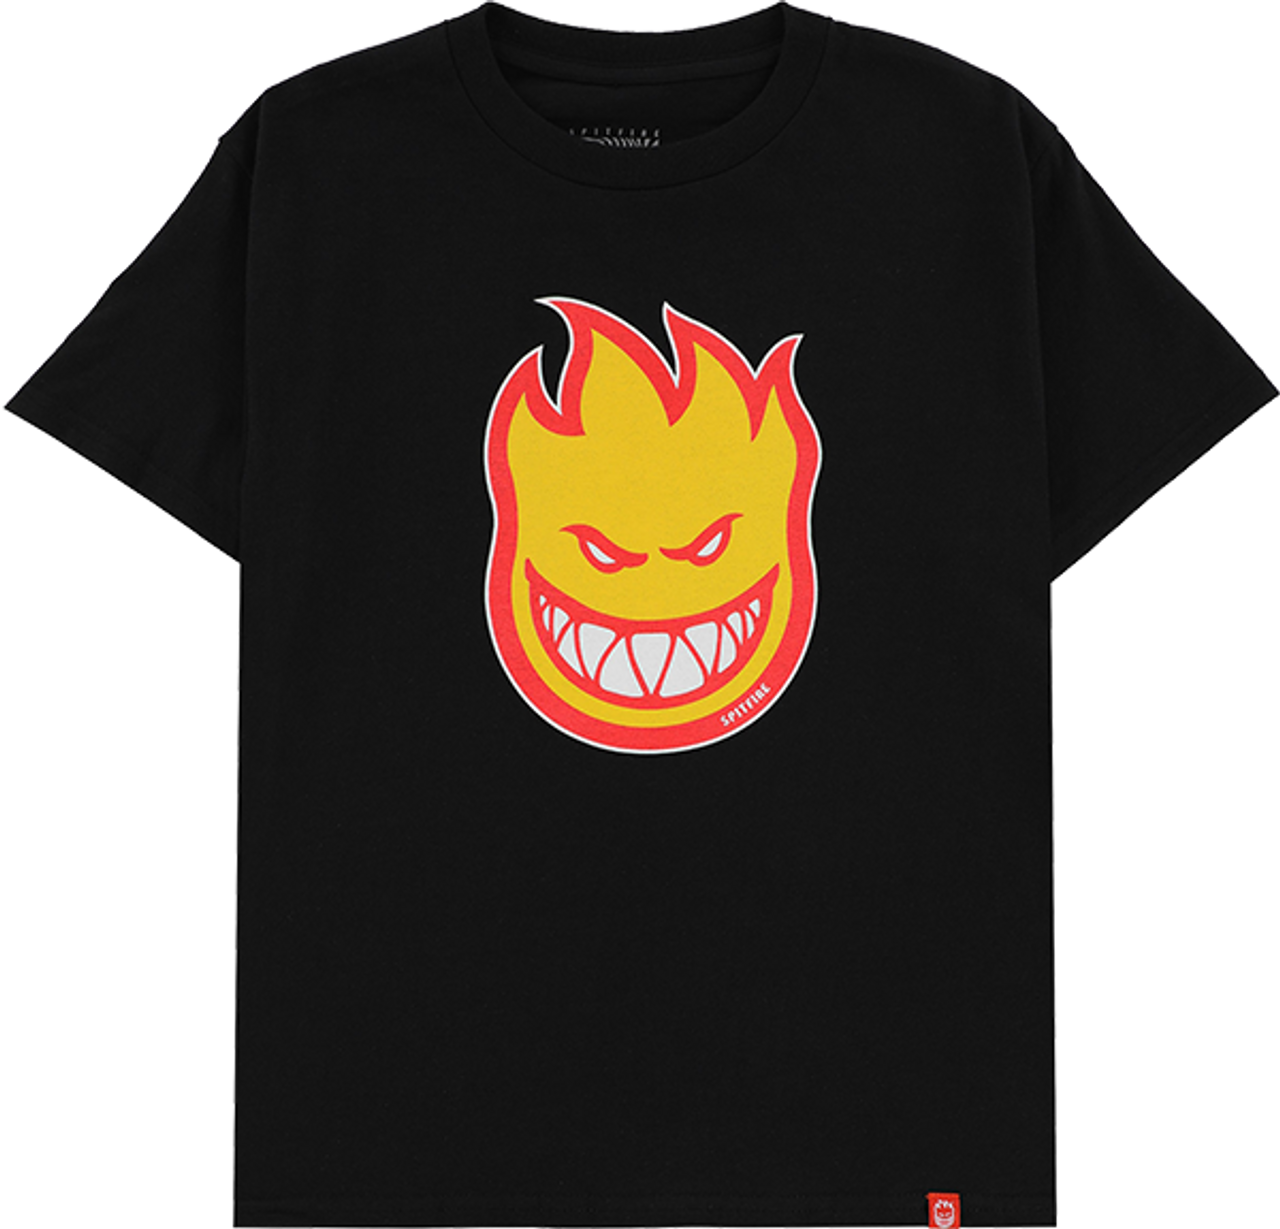 SPITFIRE BIGHEAD FILL YOUTH SS YOUTH XLARGE BLK/GOLD/RED